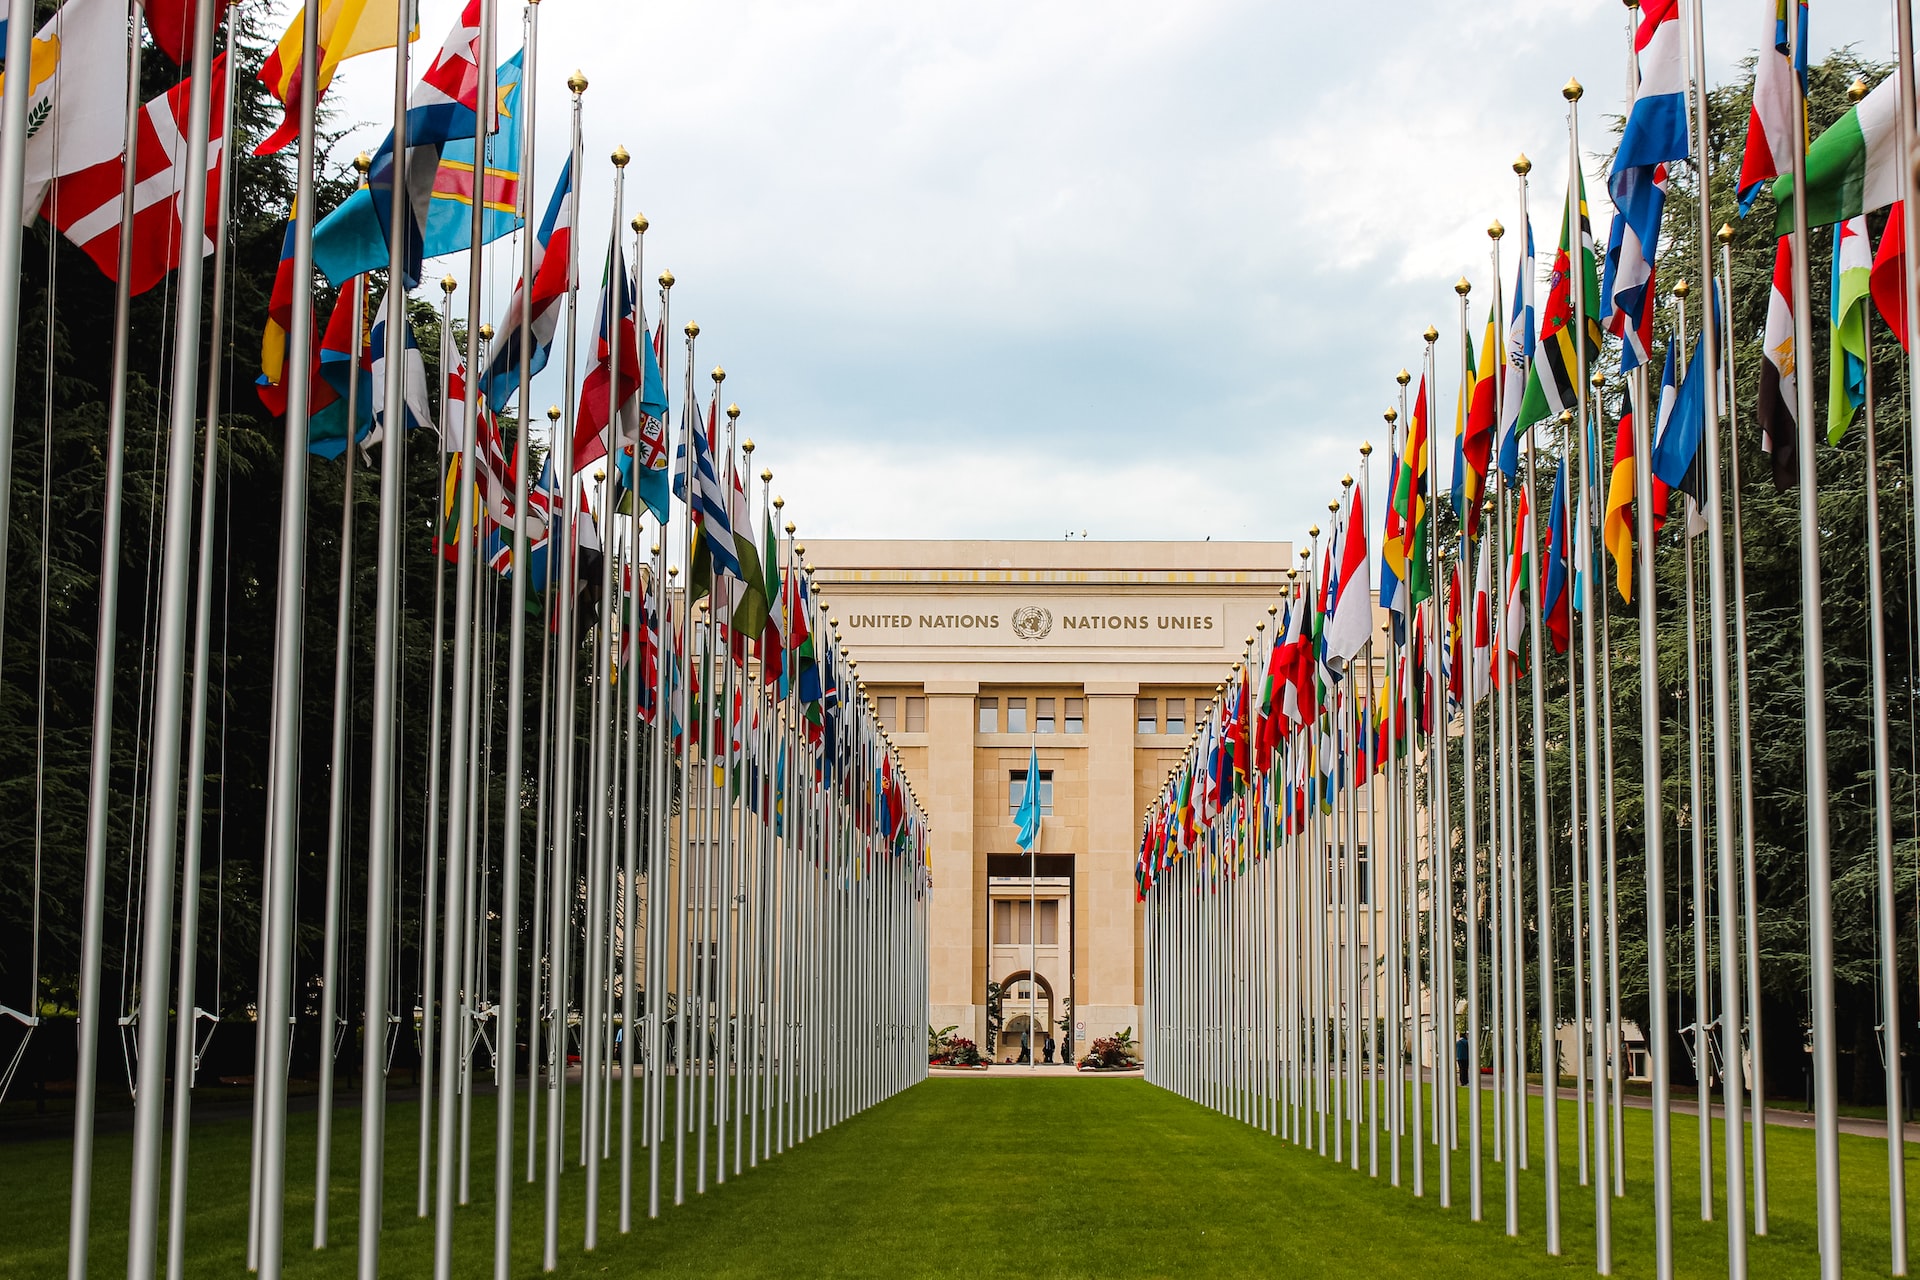 Flags at the United Nations building, which you can visit on a day trip to Geneva (photo: Mathias Reding)